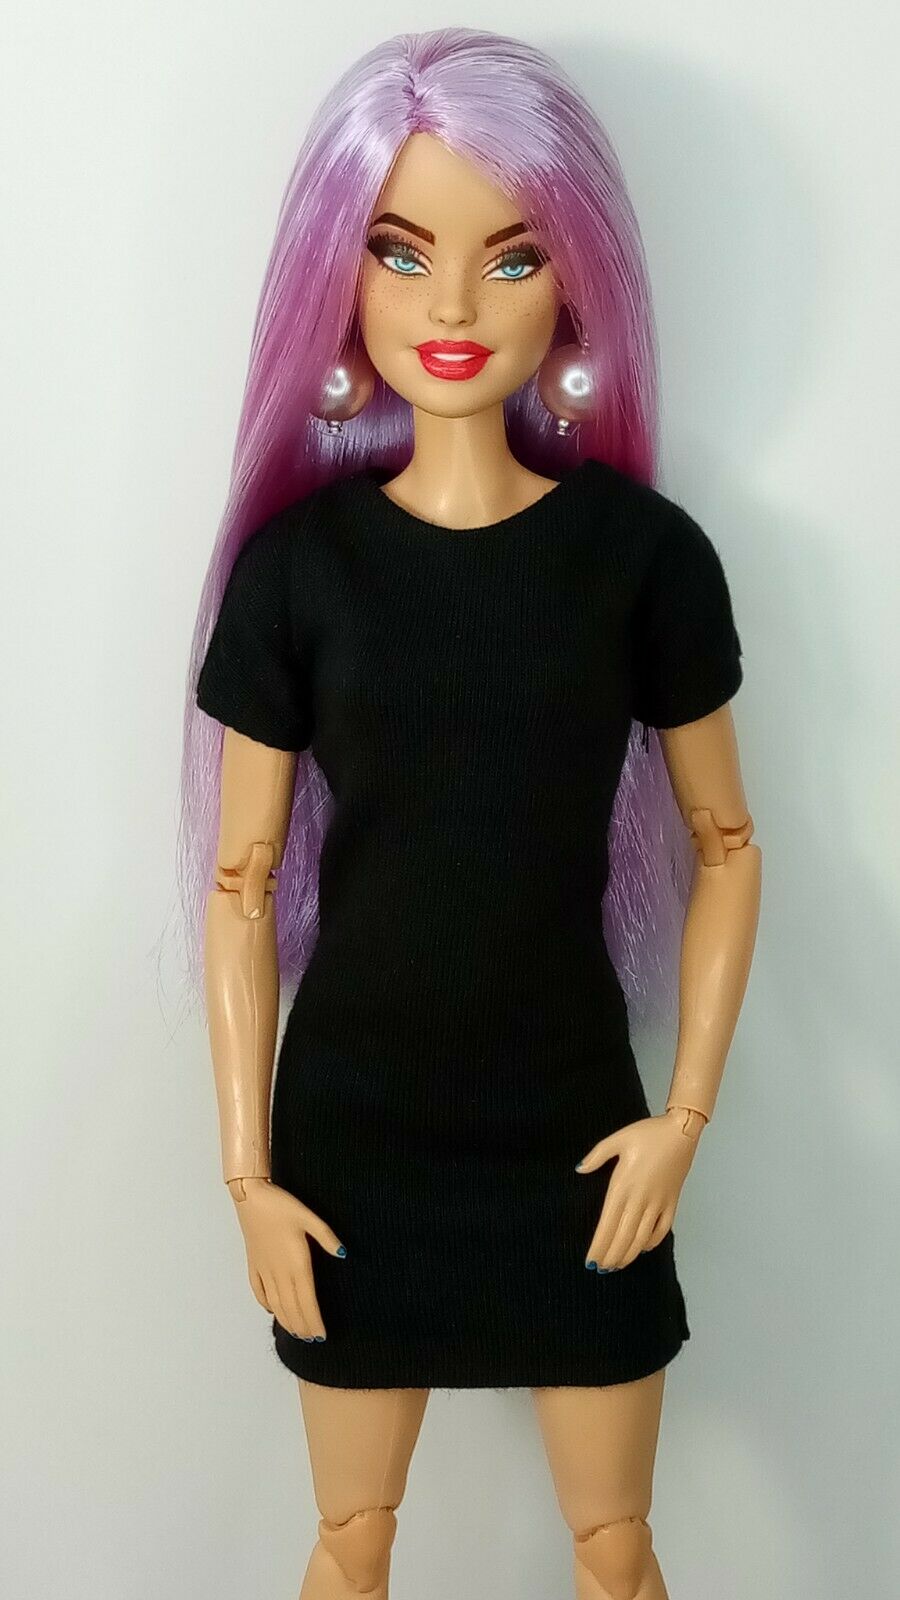 Ooak Barbie Doll, Full Repaint And Reroot, Purple Hair, Made To Move Body